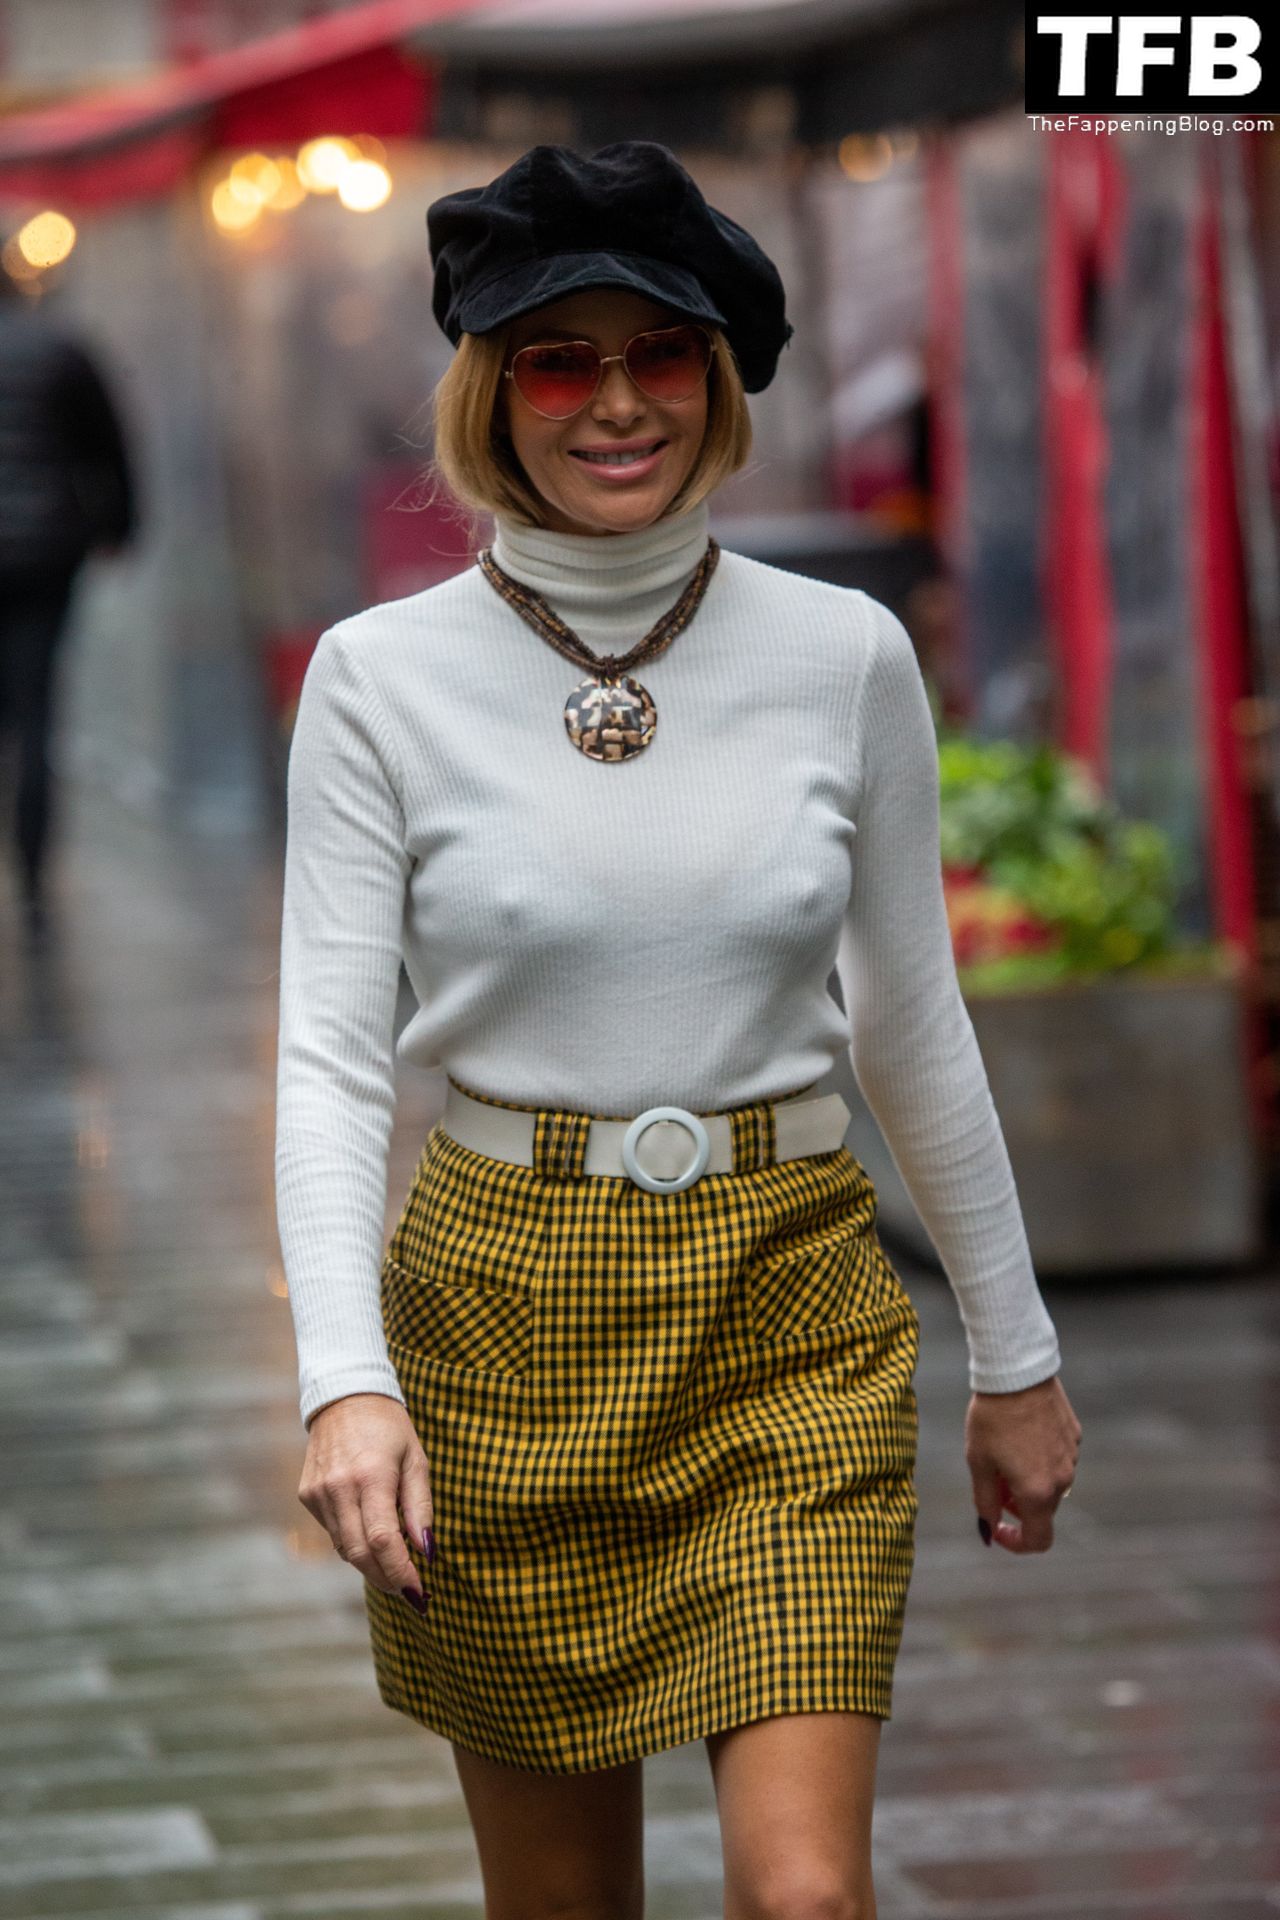 Amanda Holden Sexy The Fappening Blog 10 - Amanda Holden Shows Off Her Pokies Leaving the Global Radio Studios in London (46 Photos)